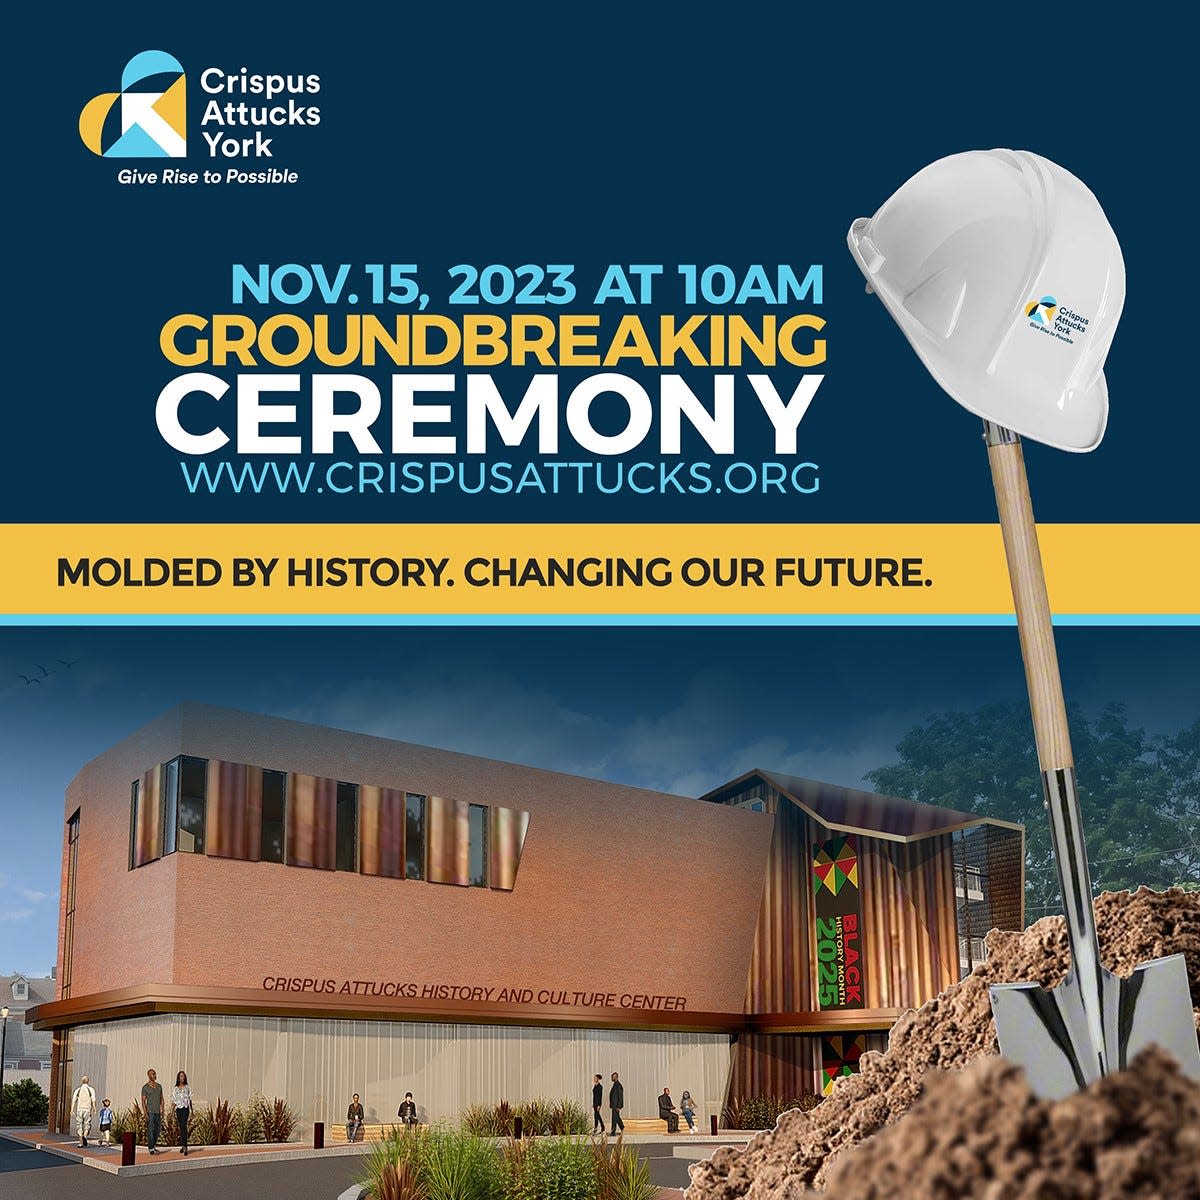 The public is invited to the 10 a.m. Nov. 15 groundbreaking ceremony for the Crispus Attucks History and Culture Center. The event will take place at 45 Boundary Avenue, York.